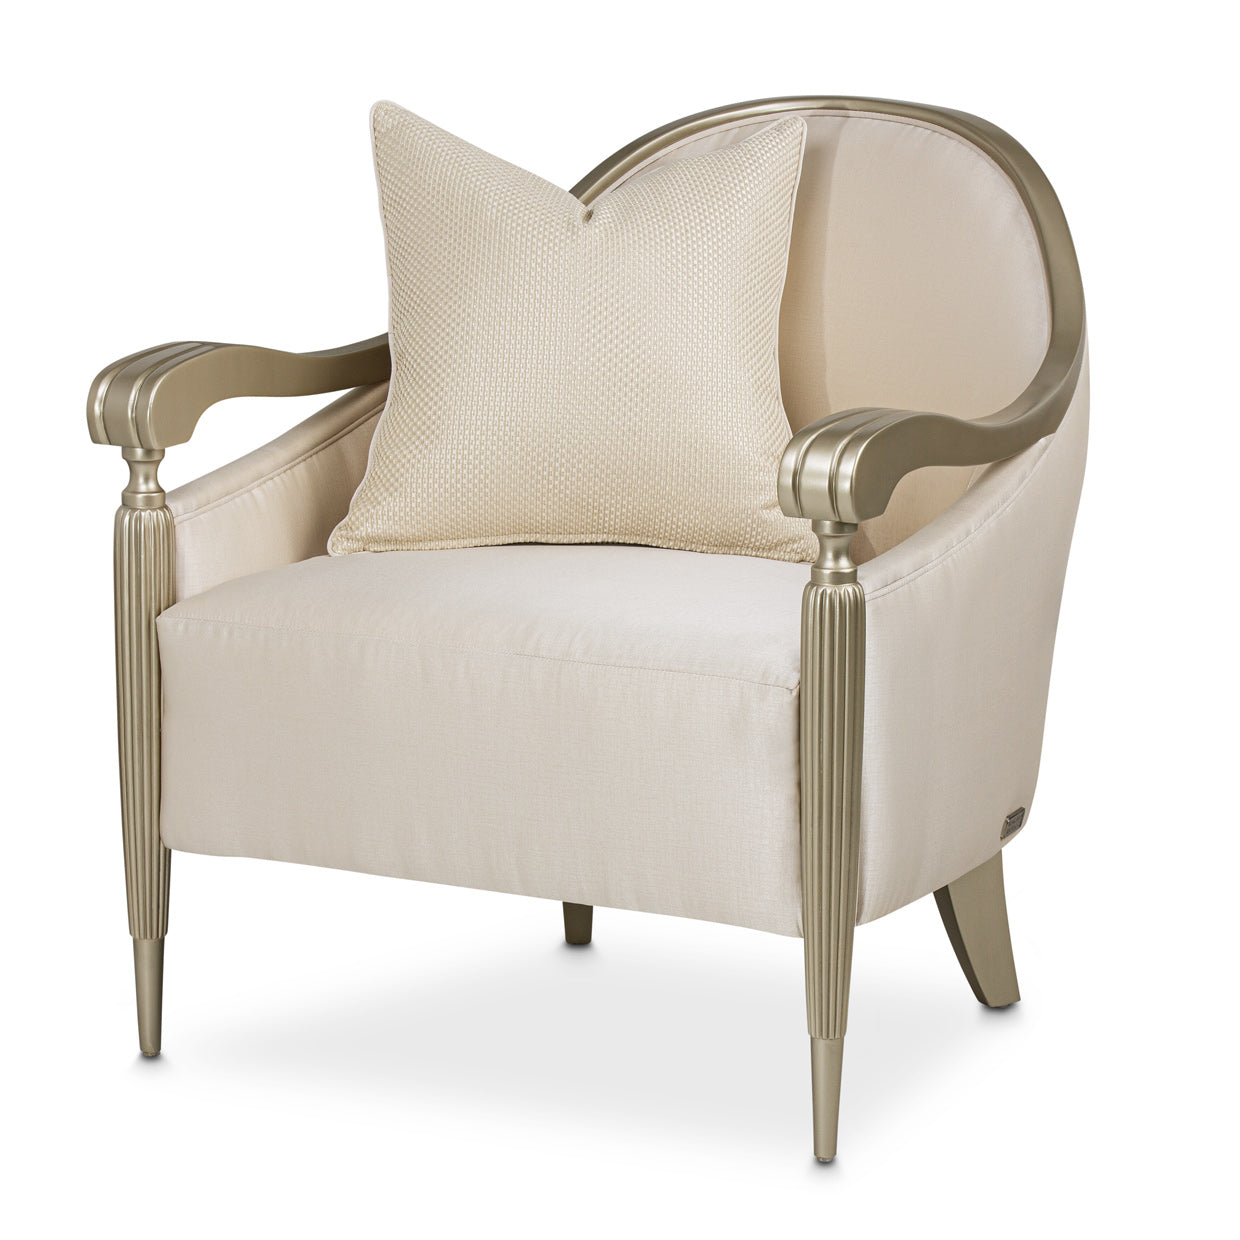 LONDON PLACE Accent Chair - Dream art Gallery